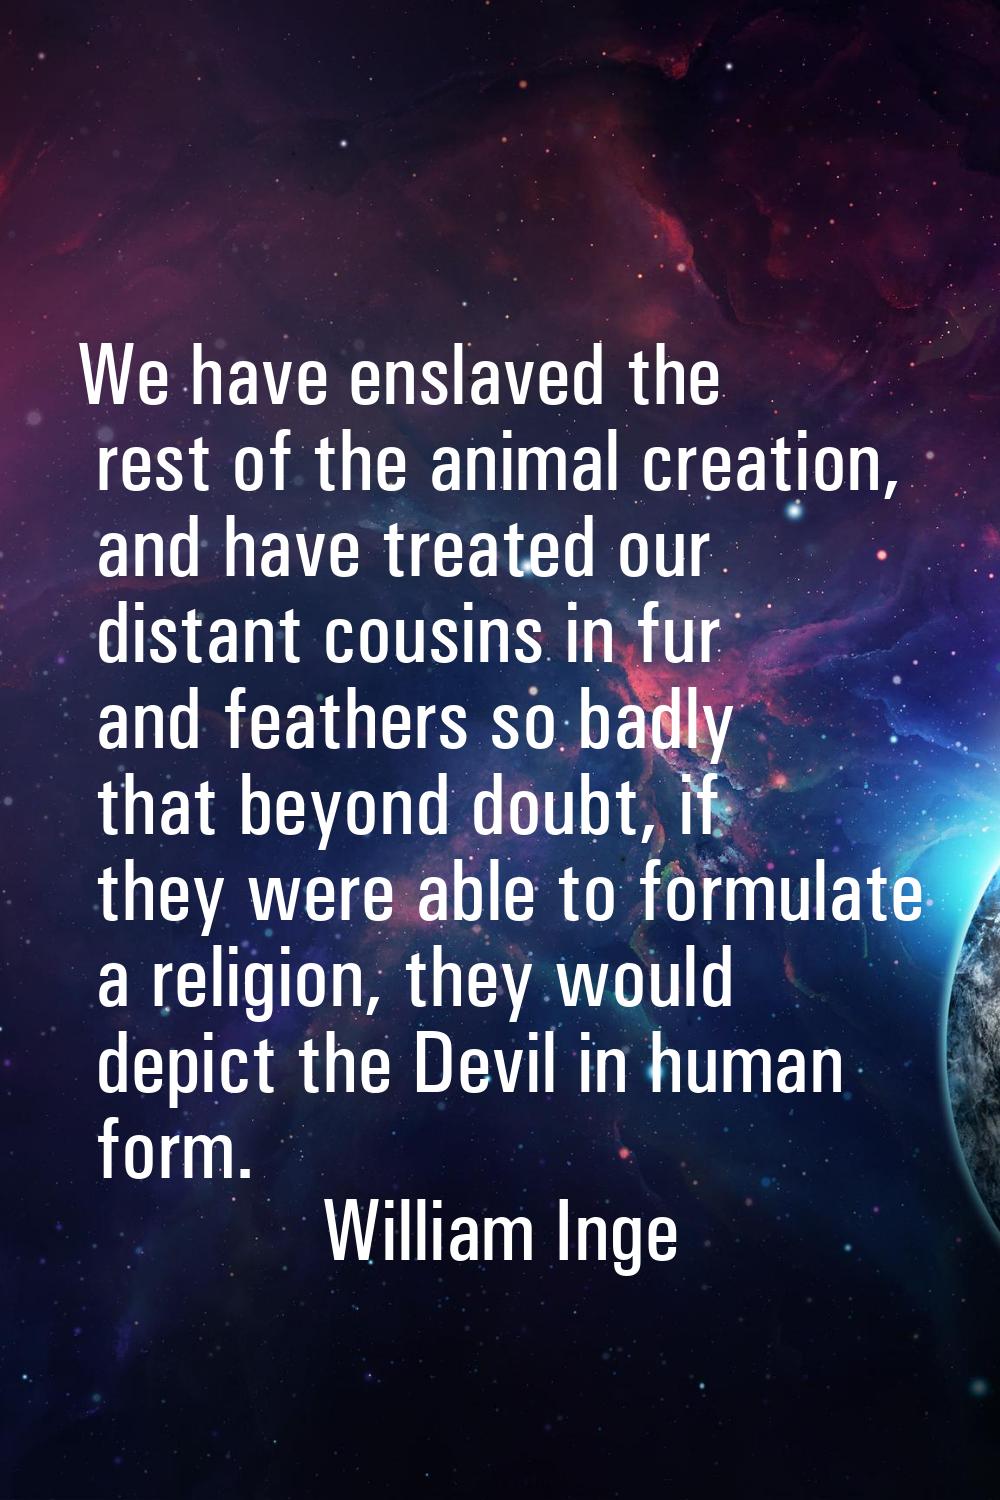 We have enslaved the rest of the animal creation, and have treated our distant cousins in fur and f